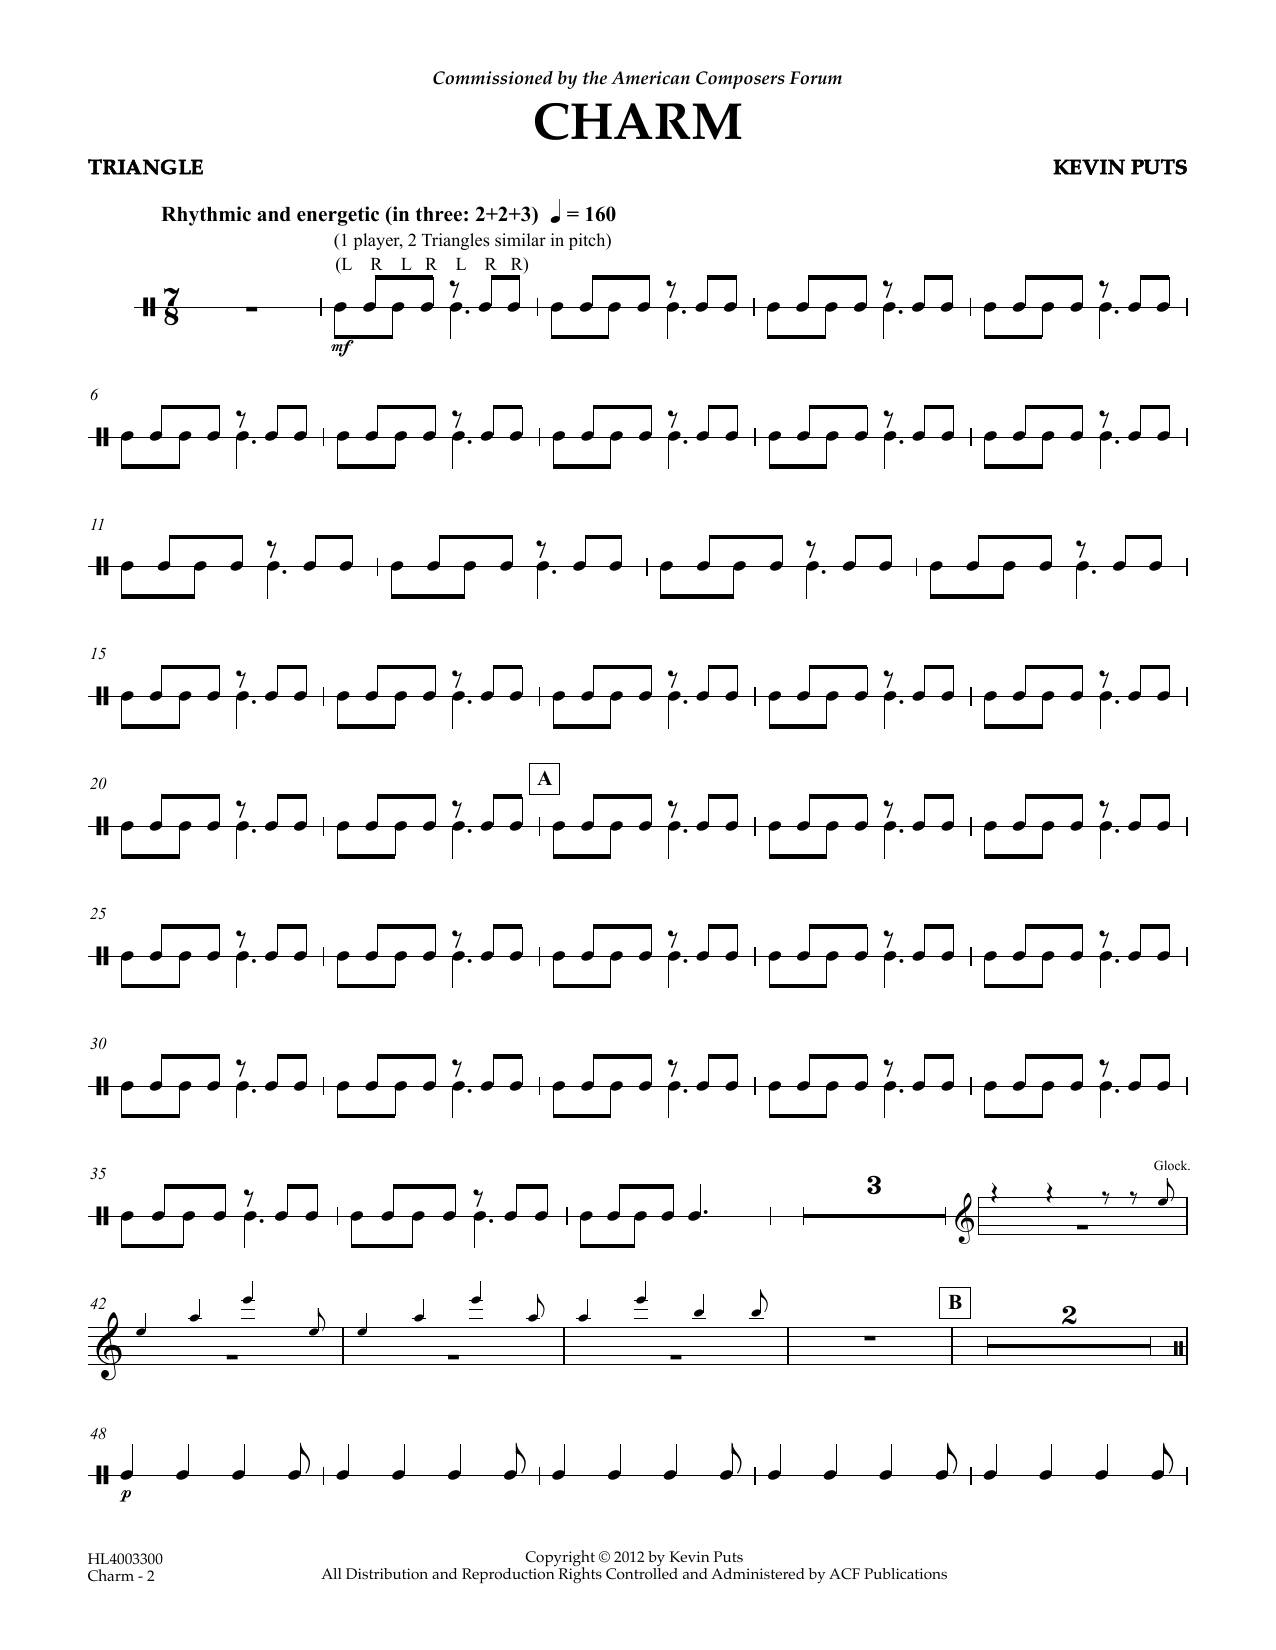 Download Kevin Puts Charm - Triangle Sheet Music